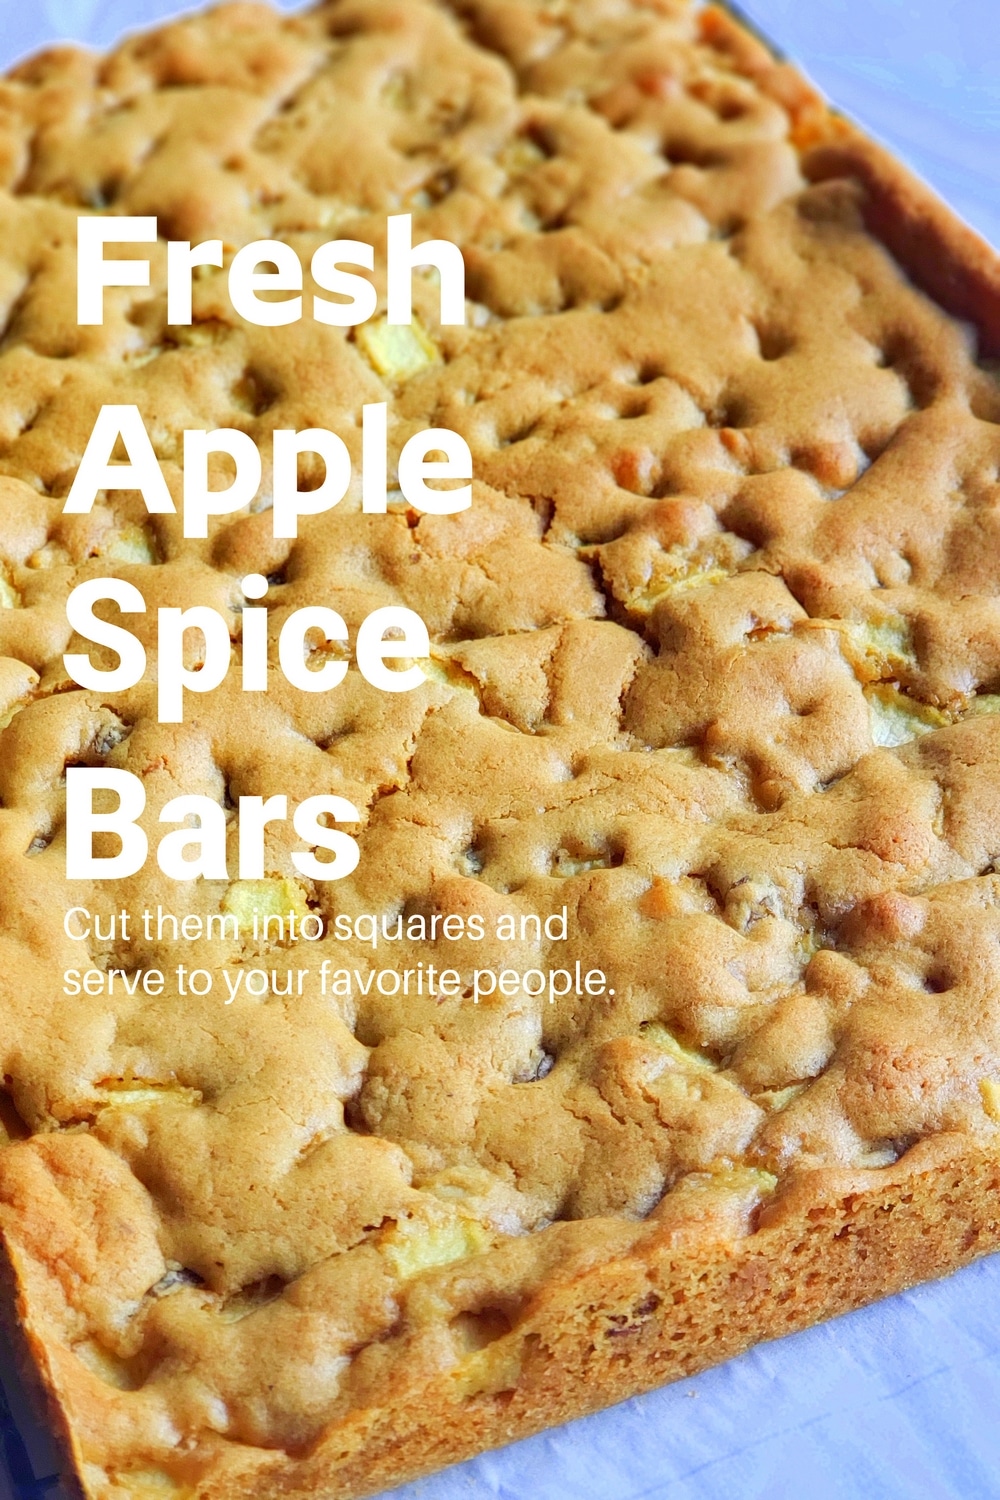 These light and fluffy, fresh Apple Bars come together with the perfect balance of golden raisins, walnuts, and a spice blend that channels the spirit of apple pie. Whether it's apple season or simply a random apple hankering, these bars are a go-to sweet treat. via @cmpollak1